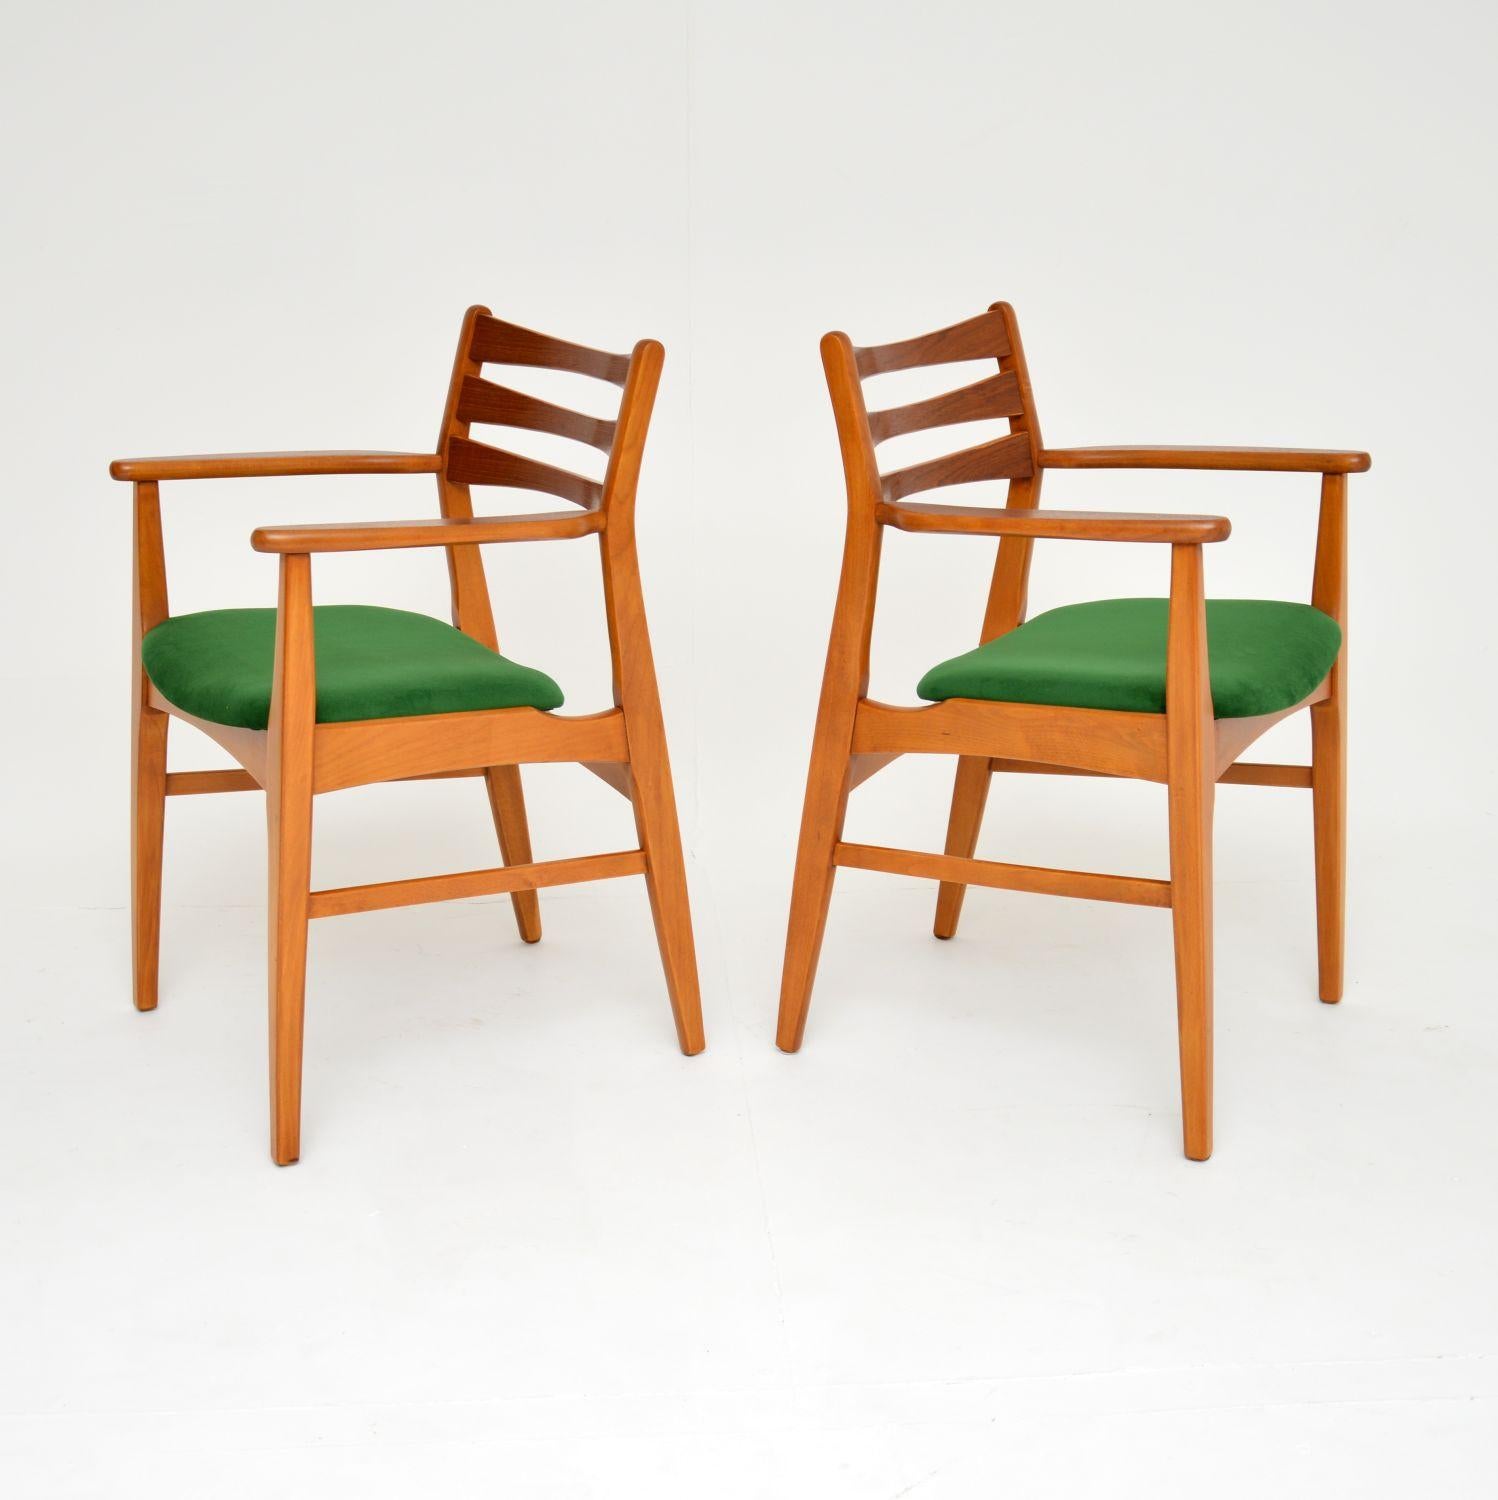 An excellent pair of Danish vintage carver armchairs. These were made in Denmark and date from the 1960’s.

They have solid beech and teak frames, they are beautifully designed and extremely well made.

We have had these restored to perfection,